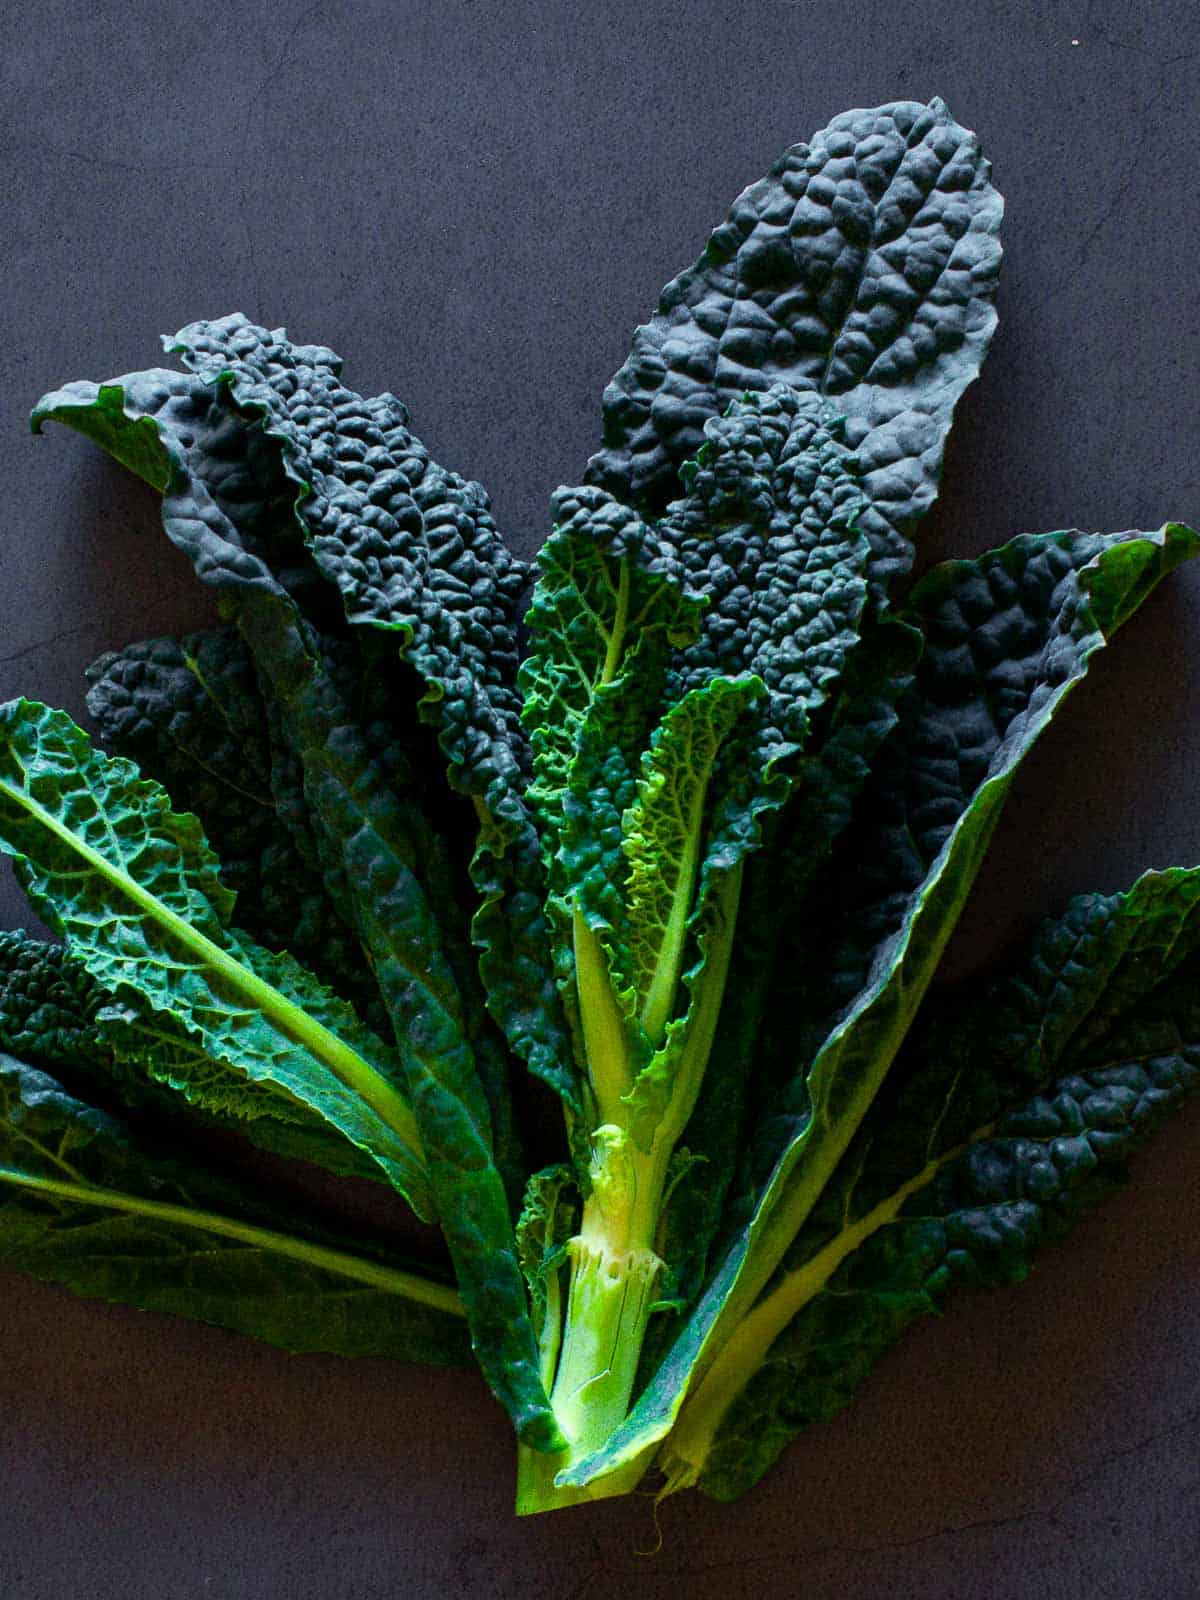 cleaned and pat dried kale.